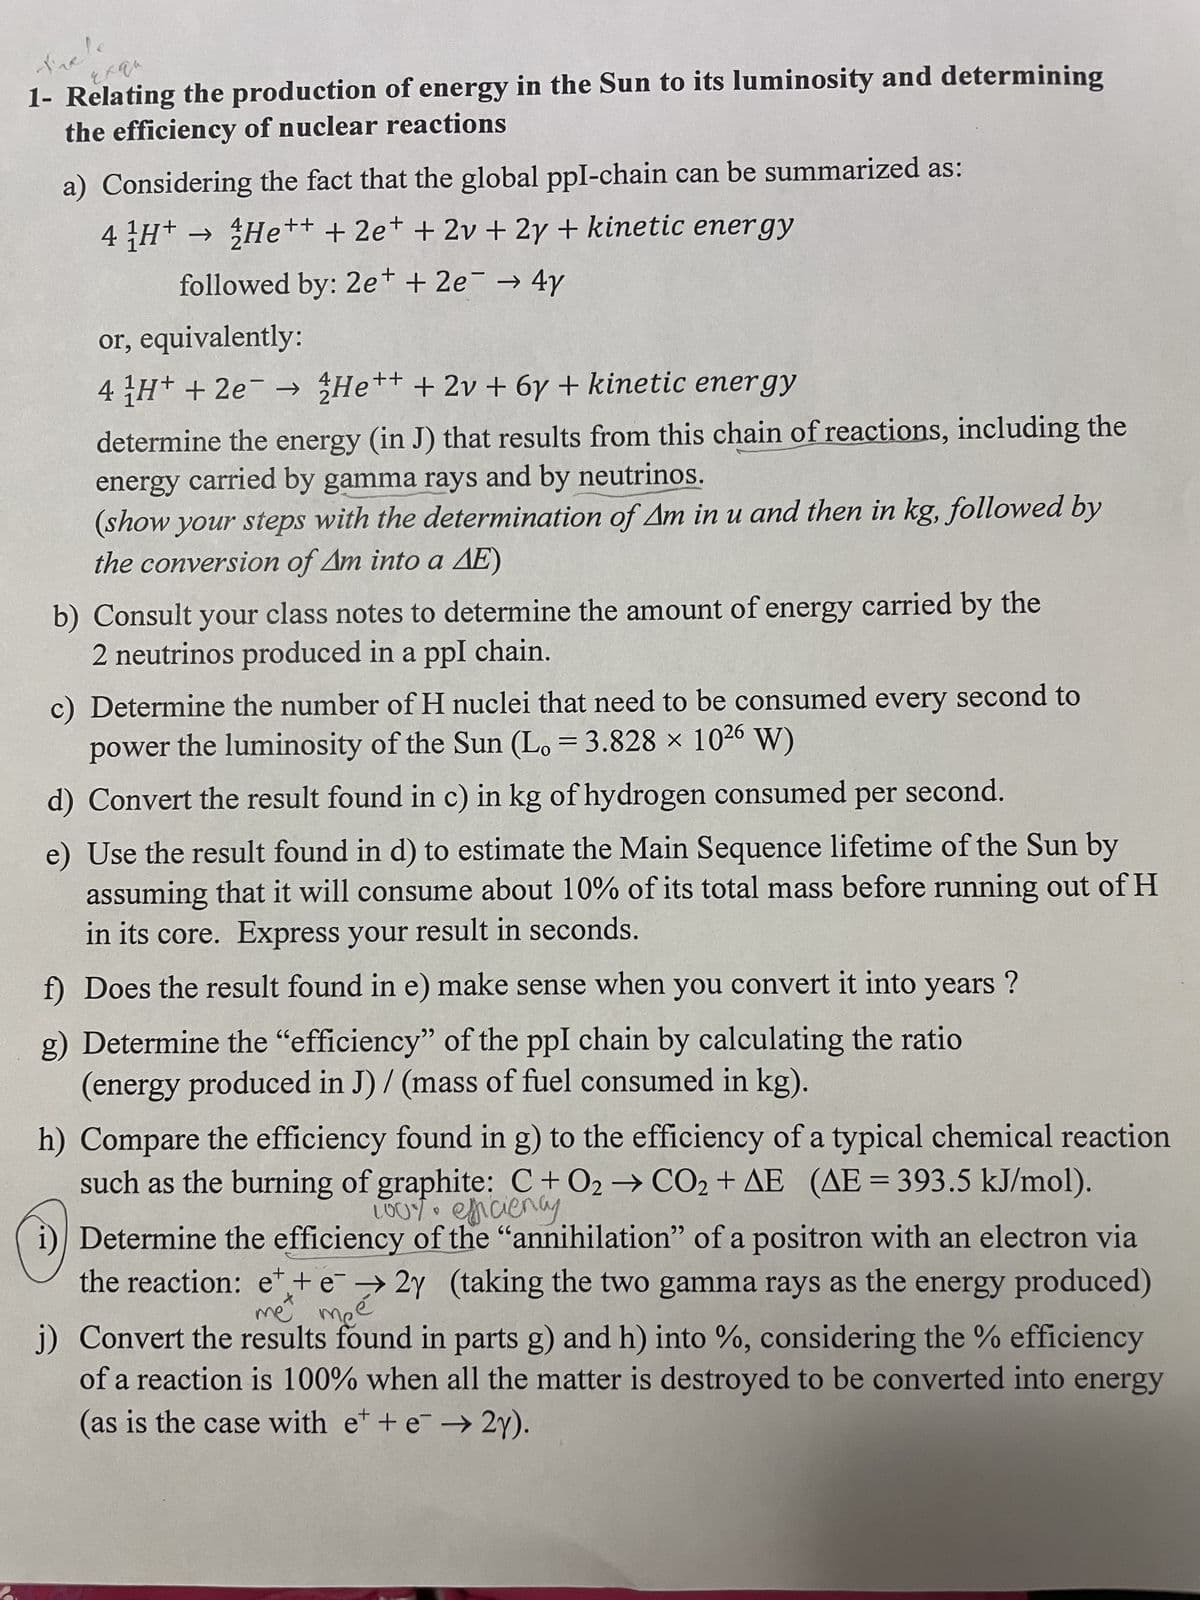 Trele
qu
1- Relating the production of energy in the Sun to its luminosity and determining
the efficiency of nuclear reactions
a) Considering the fact that the global ppl-chain can be summarized as:
4 ¹H+ → He++ + 2e+ + 2v + 2y + kinetic energy
followed by: 2e+ + 2e → 4y
-
or, equivalently:
4 H+ + 2e¯¯ → He++ + 2v + 6y + kinetic energy
determine the energy (in J) that results from this chain of reactions, including the
energy carried by gamma rays and by neutrinos.
(show your steps with the determination of Am in u and then in kg, followed by
the conversion of Am into a AE)
b) Consult your class notes to determine the amount of energy carried by the
2 neutrinos produced in a ppl chain.
c) Determine the number of H nuclei that need to be consumed every second to
power the luminosity of the Sun (Lo = 3.828 x 1026 W)
d) Convert the result found in c) in kg of hydrogen consumed per second.
e) Use the result found in d) to estimate the Main Sequence lifetime of the Sun by
assuming that it will consume about 10% of its total mass before running out of H
in its core. Express your result in seconds.
f) Does the result found in e) make sense when you convert it into years?
g) Determine the "efficiency" of the ppl chain by calculating the ratio
(energy produced in J)/ (mass of fuel consumed in kg).
h) Compare the efficiency found in g) to the efficiency of a typical chemical reaction
such as the burning of graphite: C+02 → CO₂ + AE (AE=393.5 kJ/mol).
100% efficiency
9
i) Determine the efficiency of the "annihilation" of a positron with an electron via
the reaction: et + e2y (taking the two gamma rays as the energy produced)
met
sé
j) Convert the results found in parts g) and h) into %, considering the % efficiency
+
of a reaction is 100% when all the matter is destroyed to be converted into energy
(as is the case with et + e→ 2y).
me